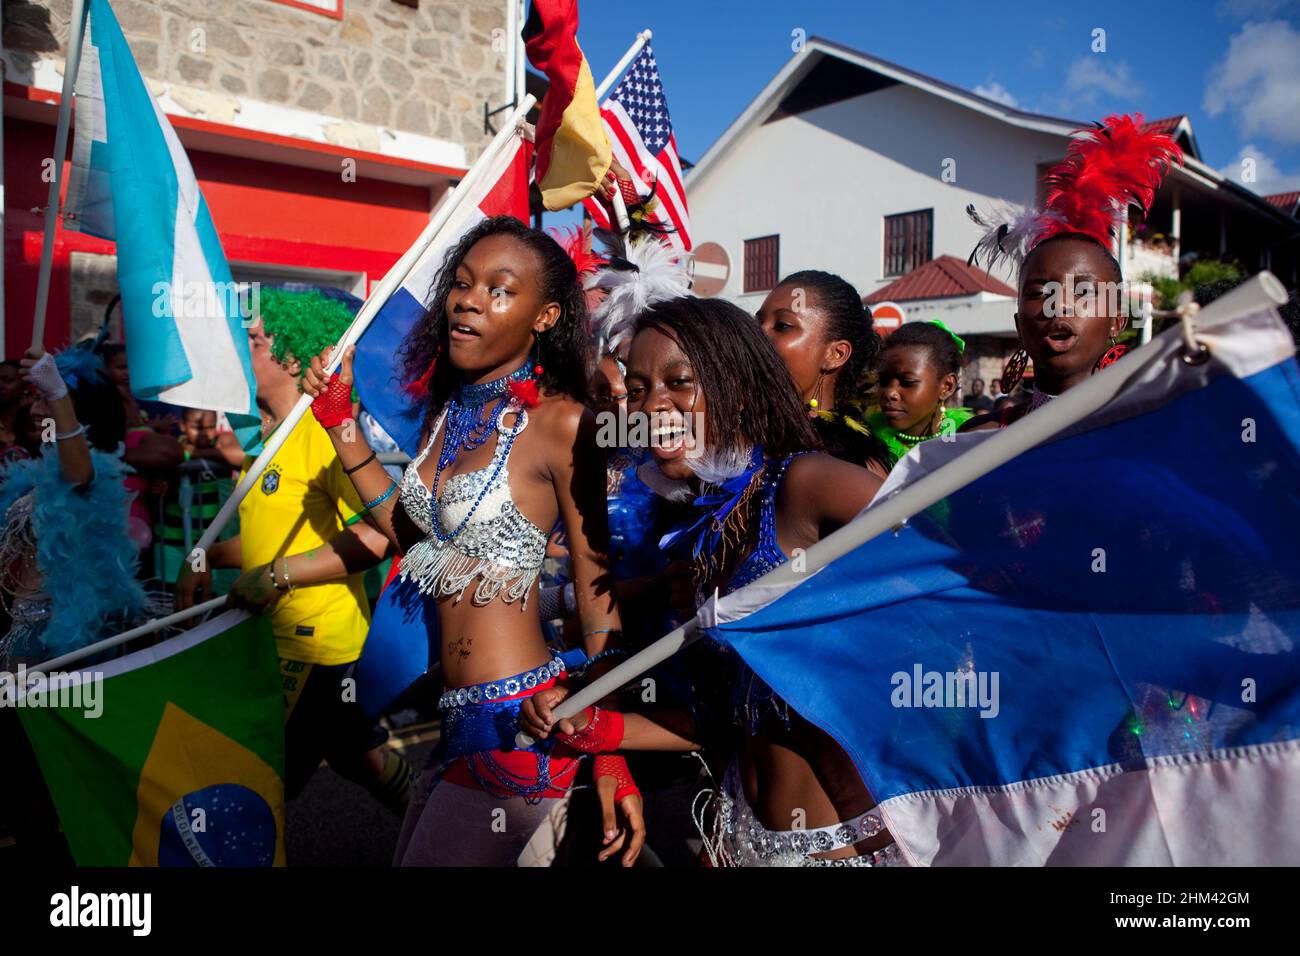 Young women waving flags and celebrating international carnival in the Seychelles. Stock Photo